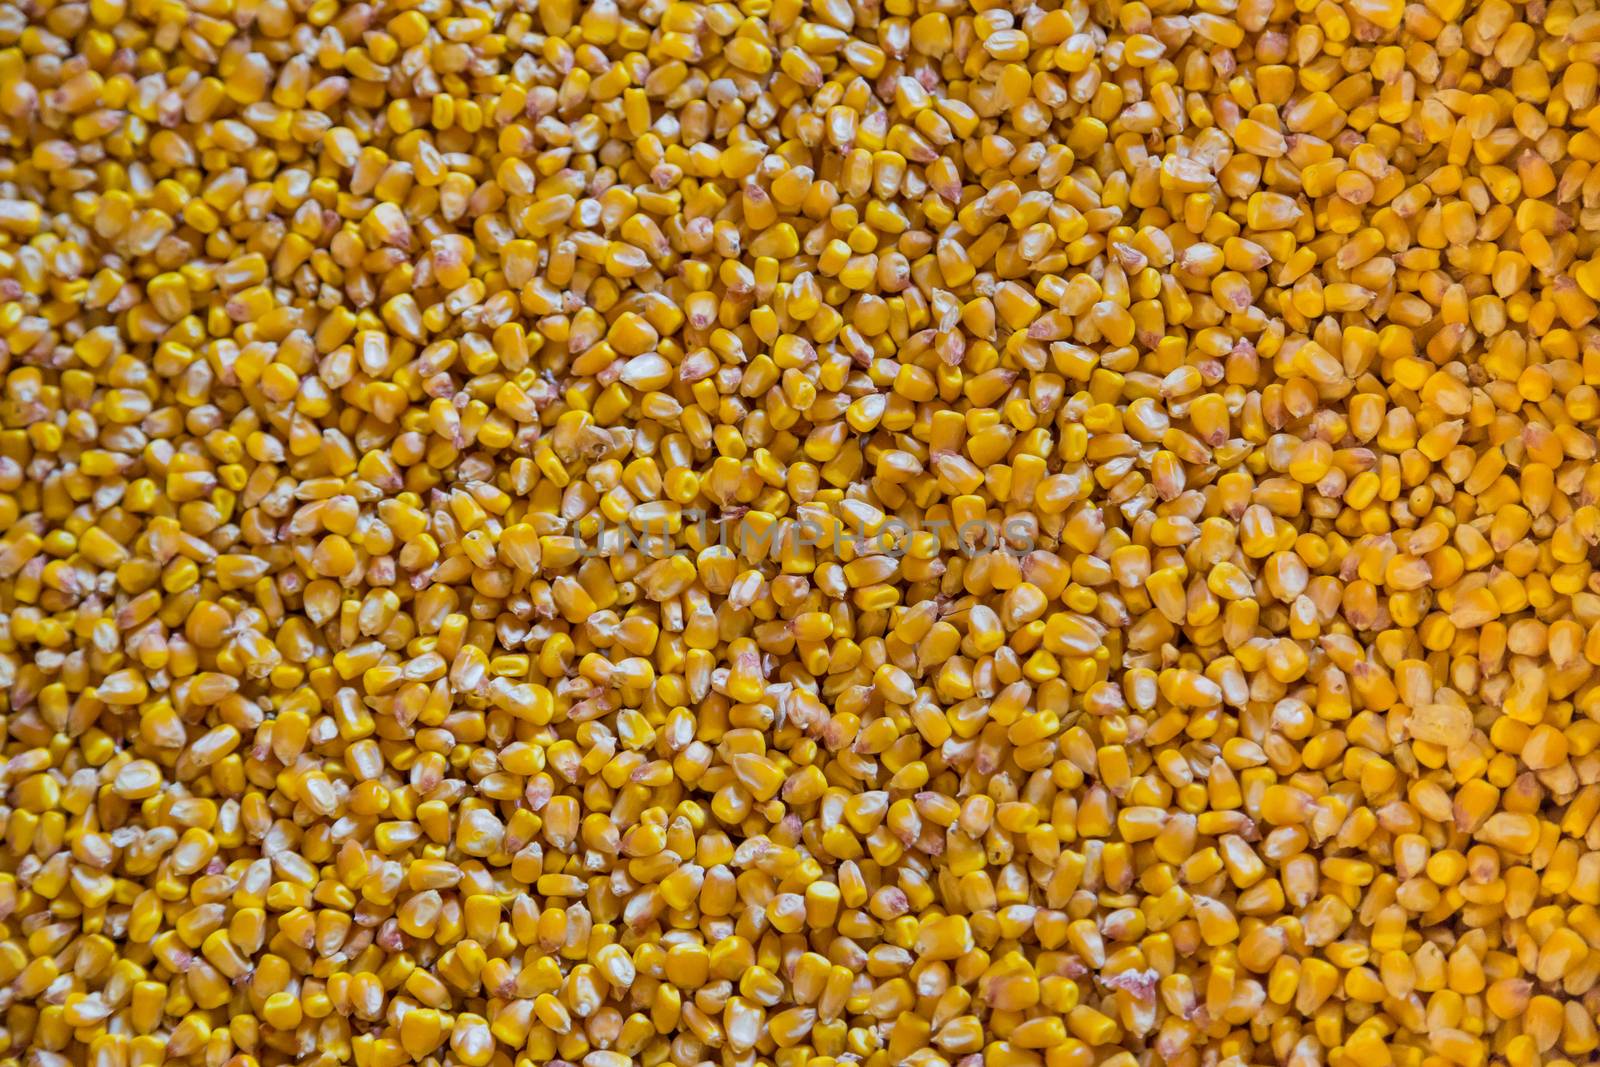 A pile of corn grains in the warehouse